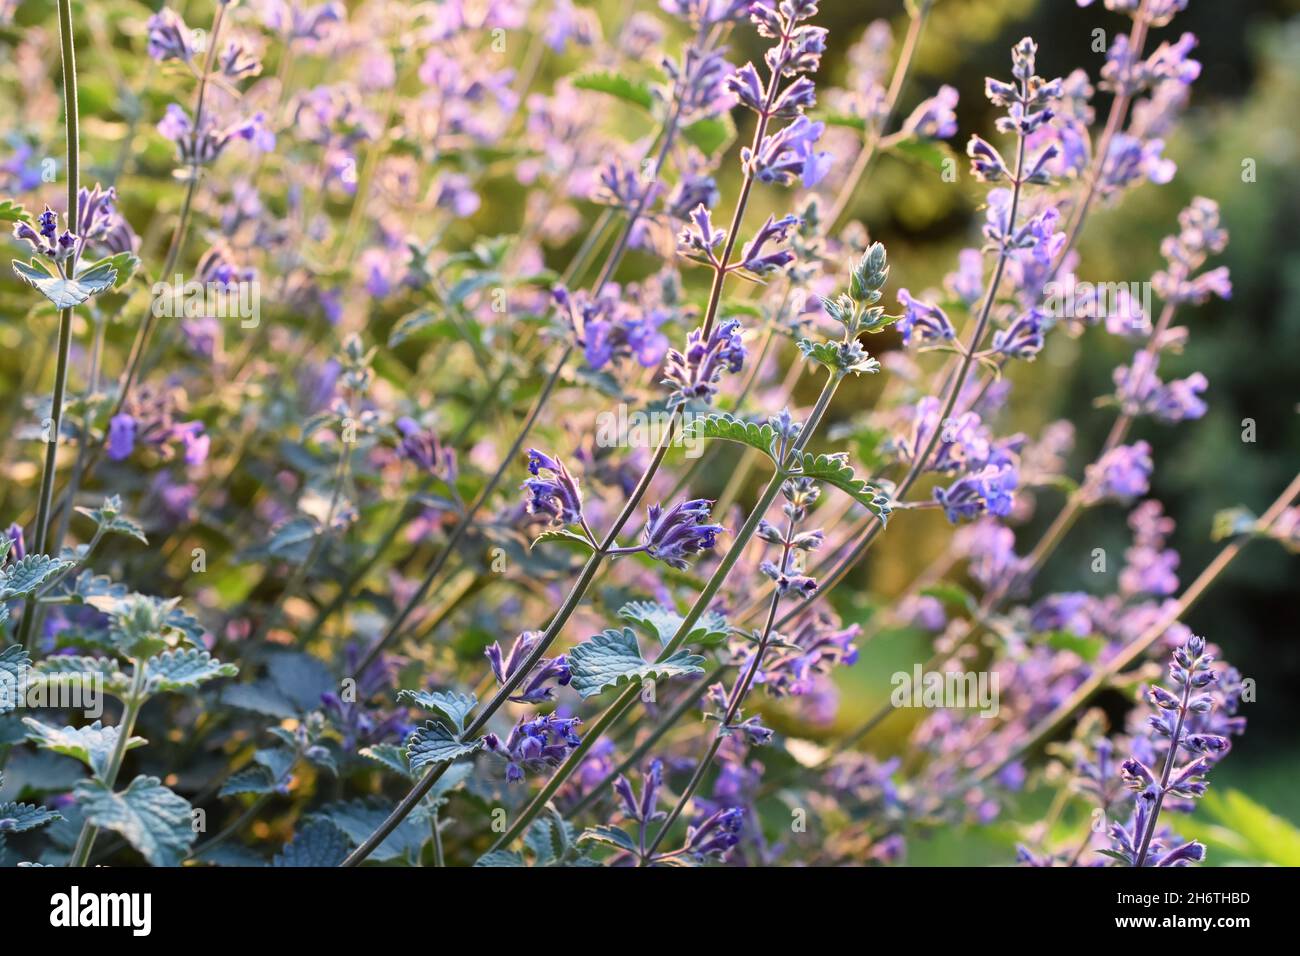 Large group of catnip flowers Nepeta cataria in a garden Stock Photo